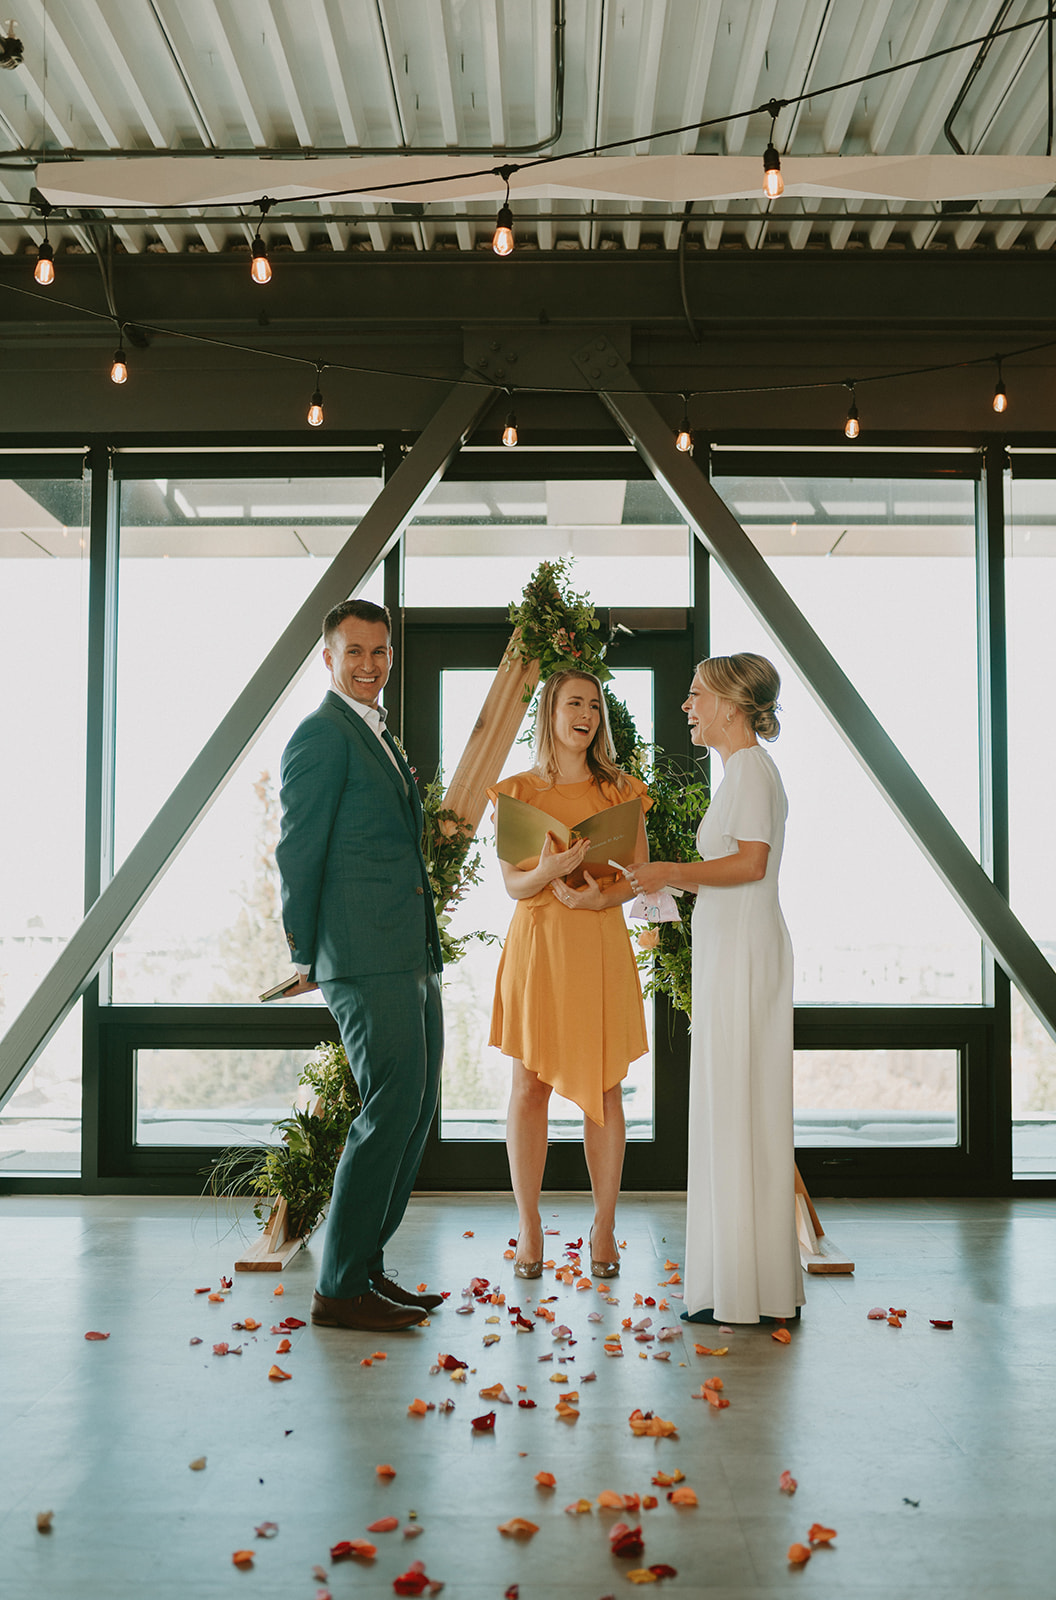 This Minimalist Micro-Wedding features a DIY Bouquet Made by the Bride Herself - indoor ceremony, triangle arch, modern wedding